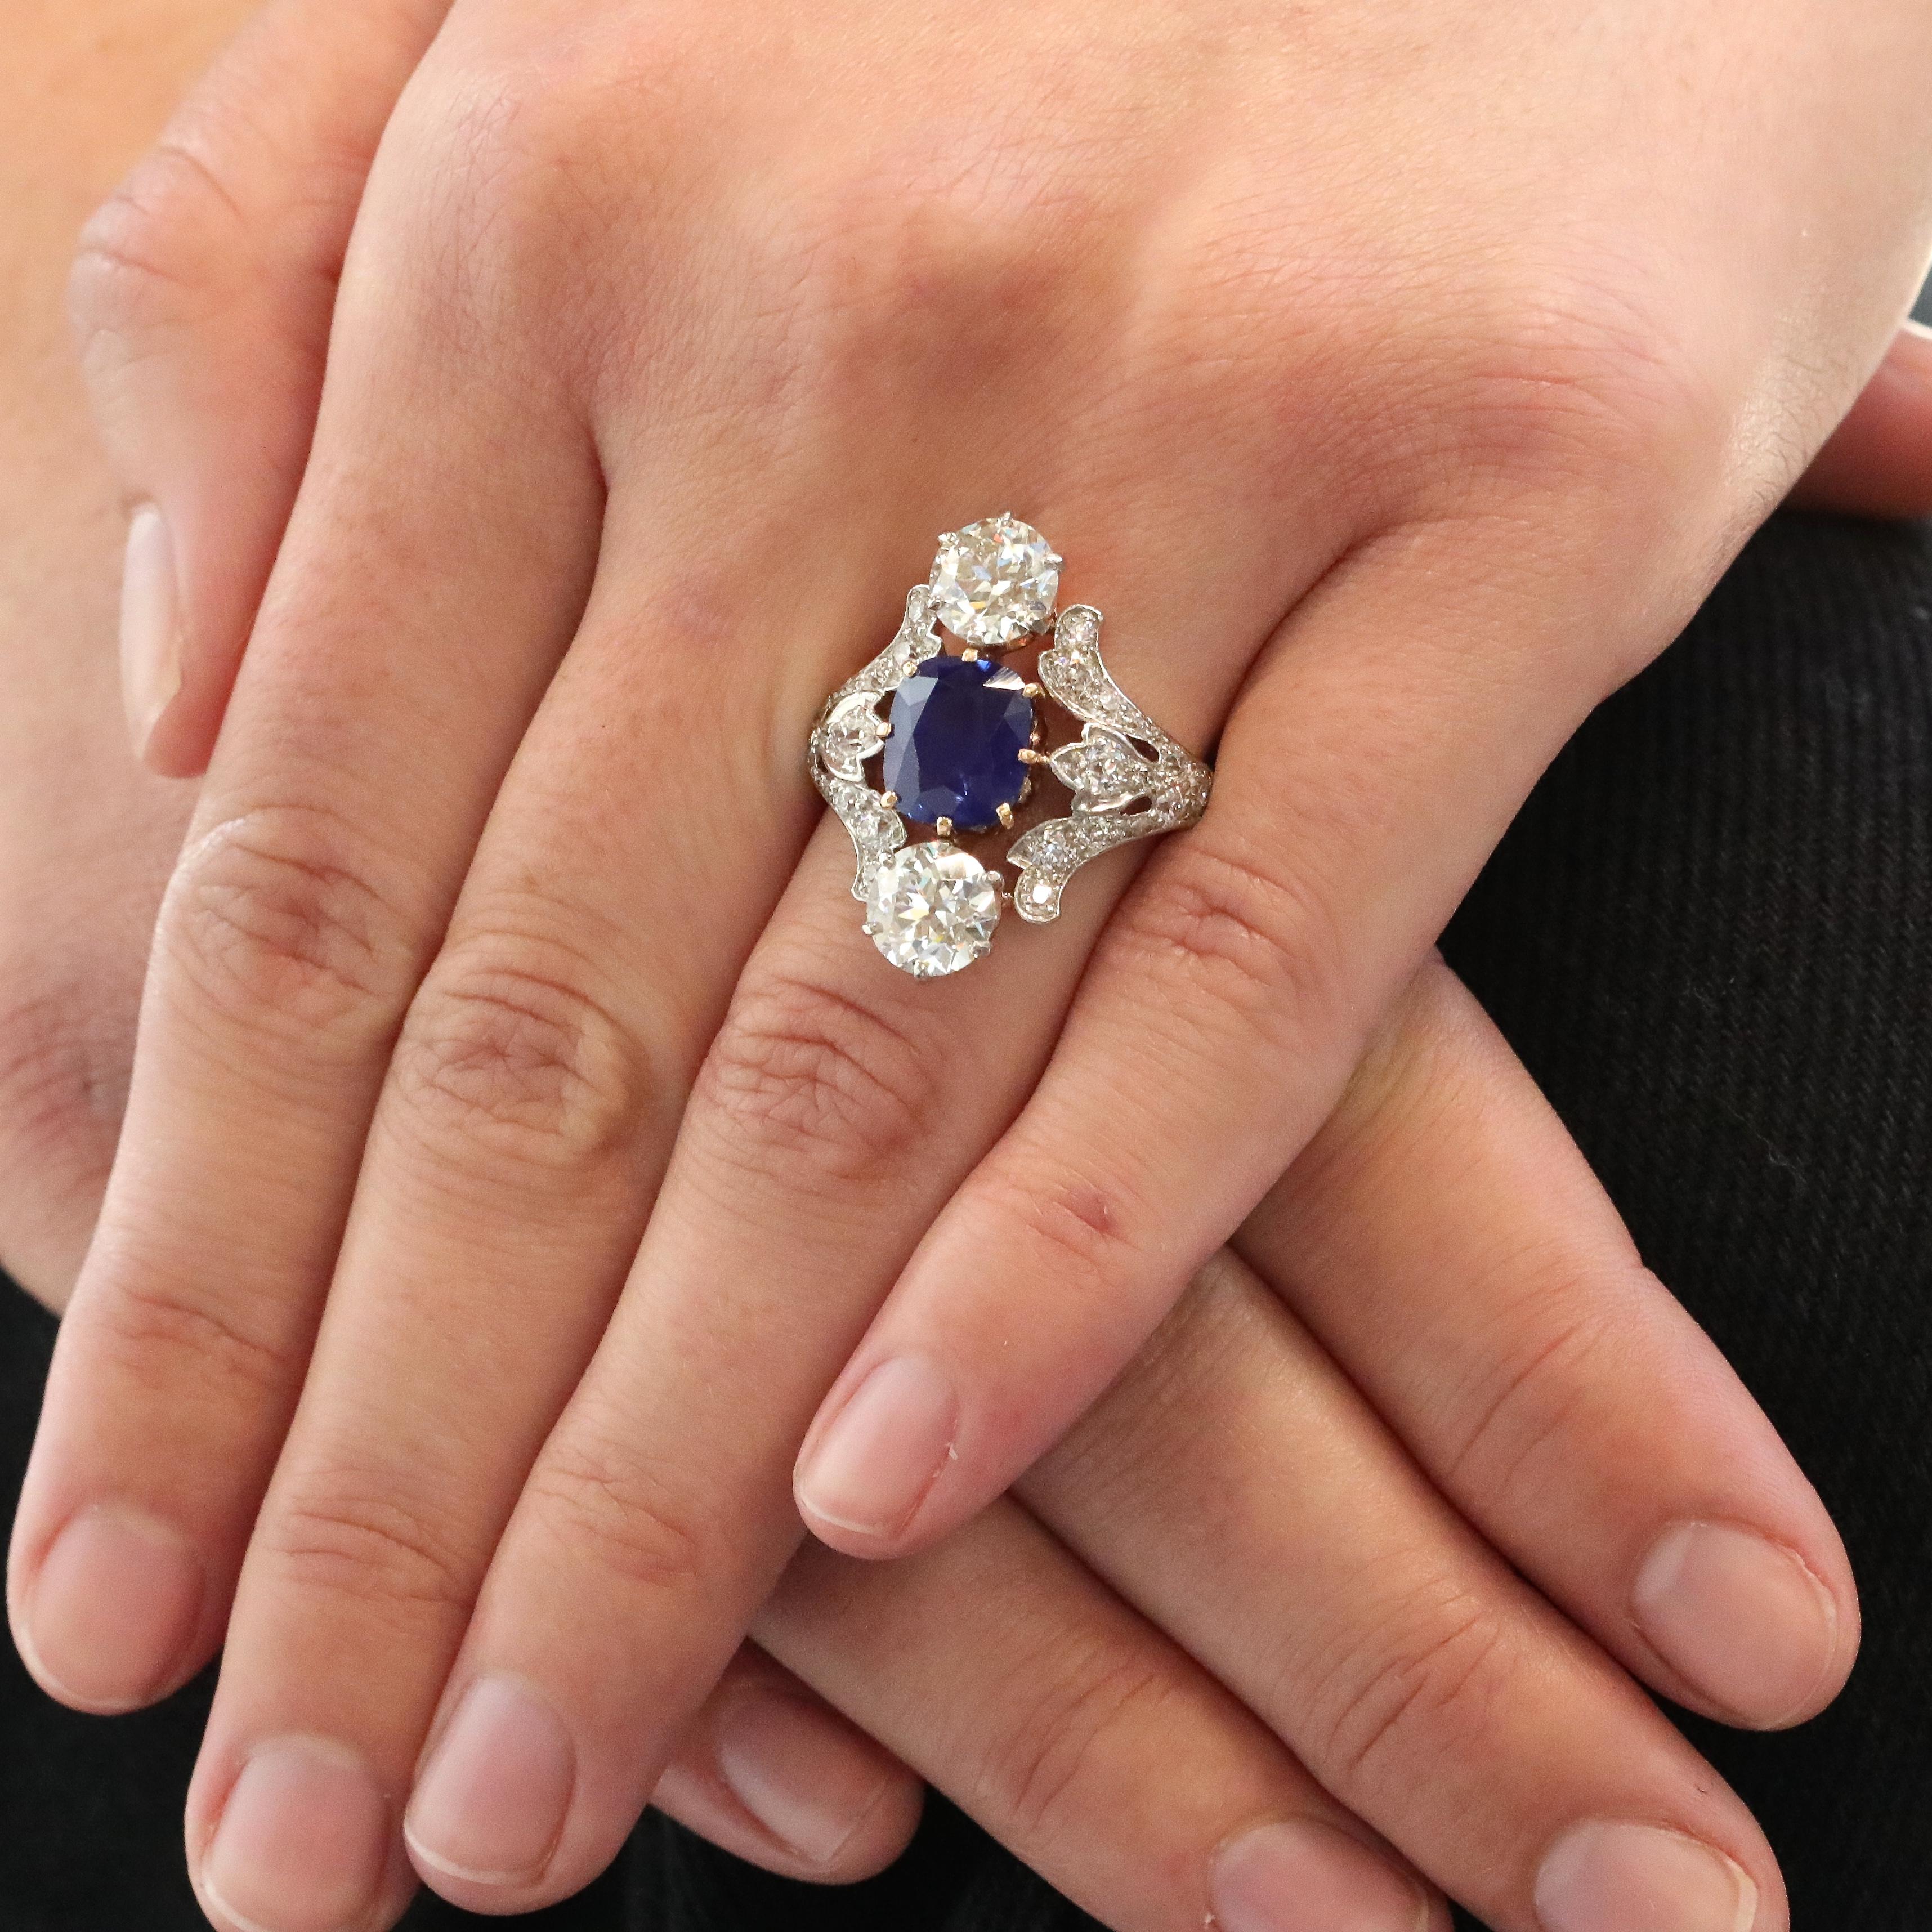 There are many renowned designs from the iconic jewelry house of Tiffany & Co. and this ring is no exception. Featuring a Kashmir Sapphire; the best in the world. There is only a finite number of them; the mine closed down years ago and what was